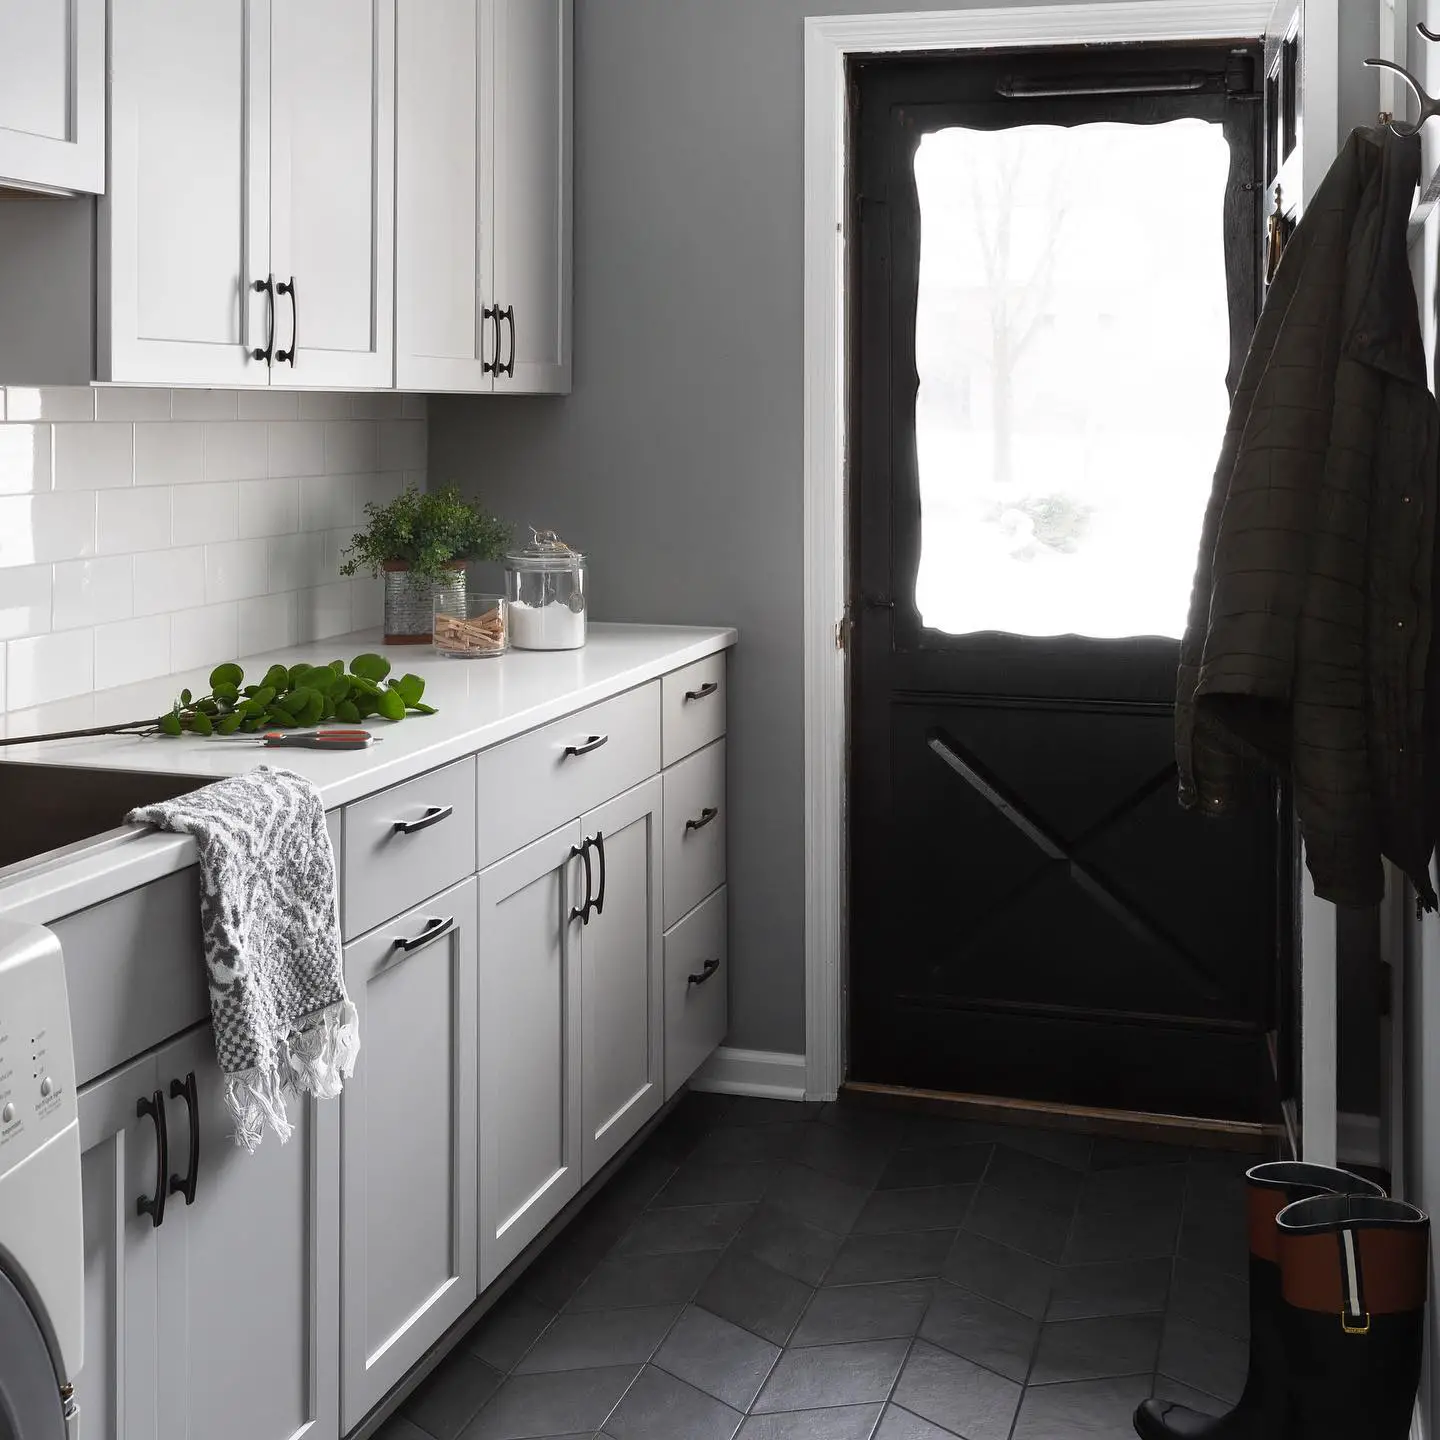 A laundry room with black door.